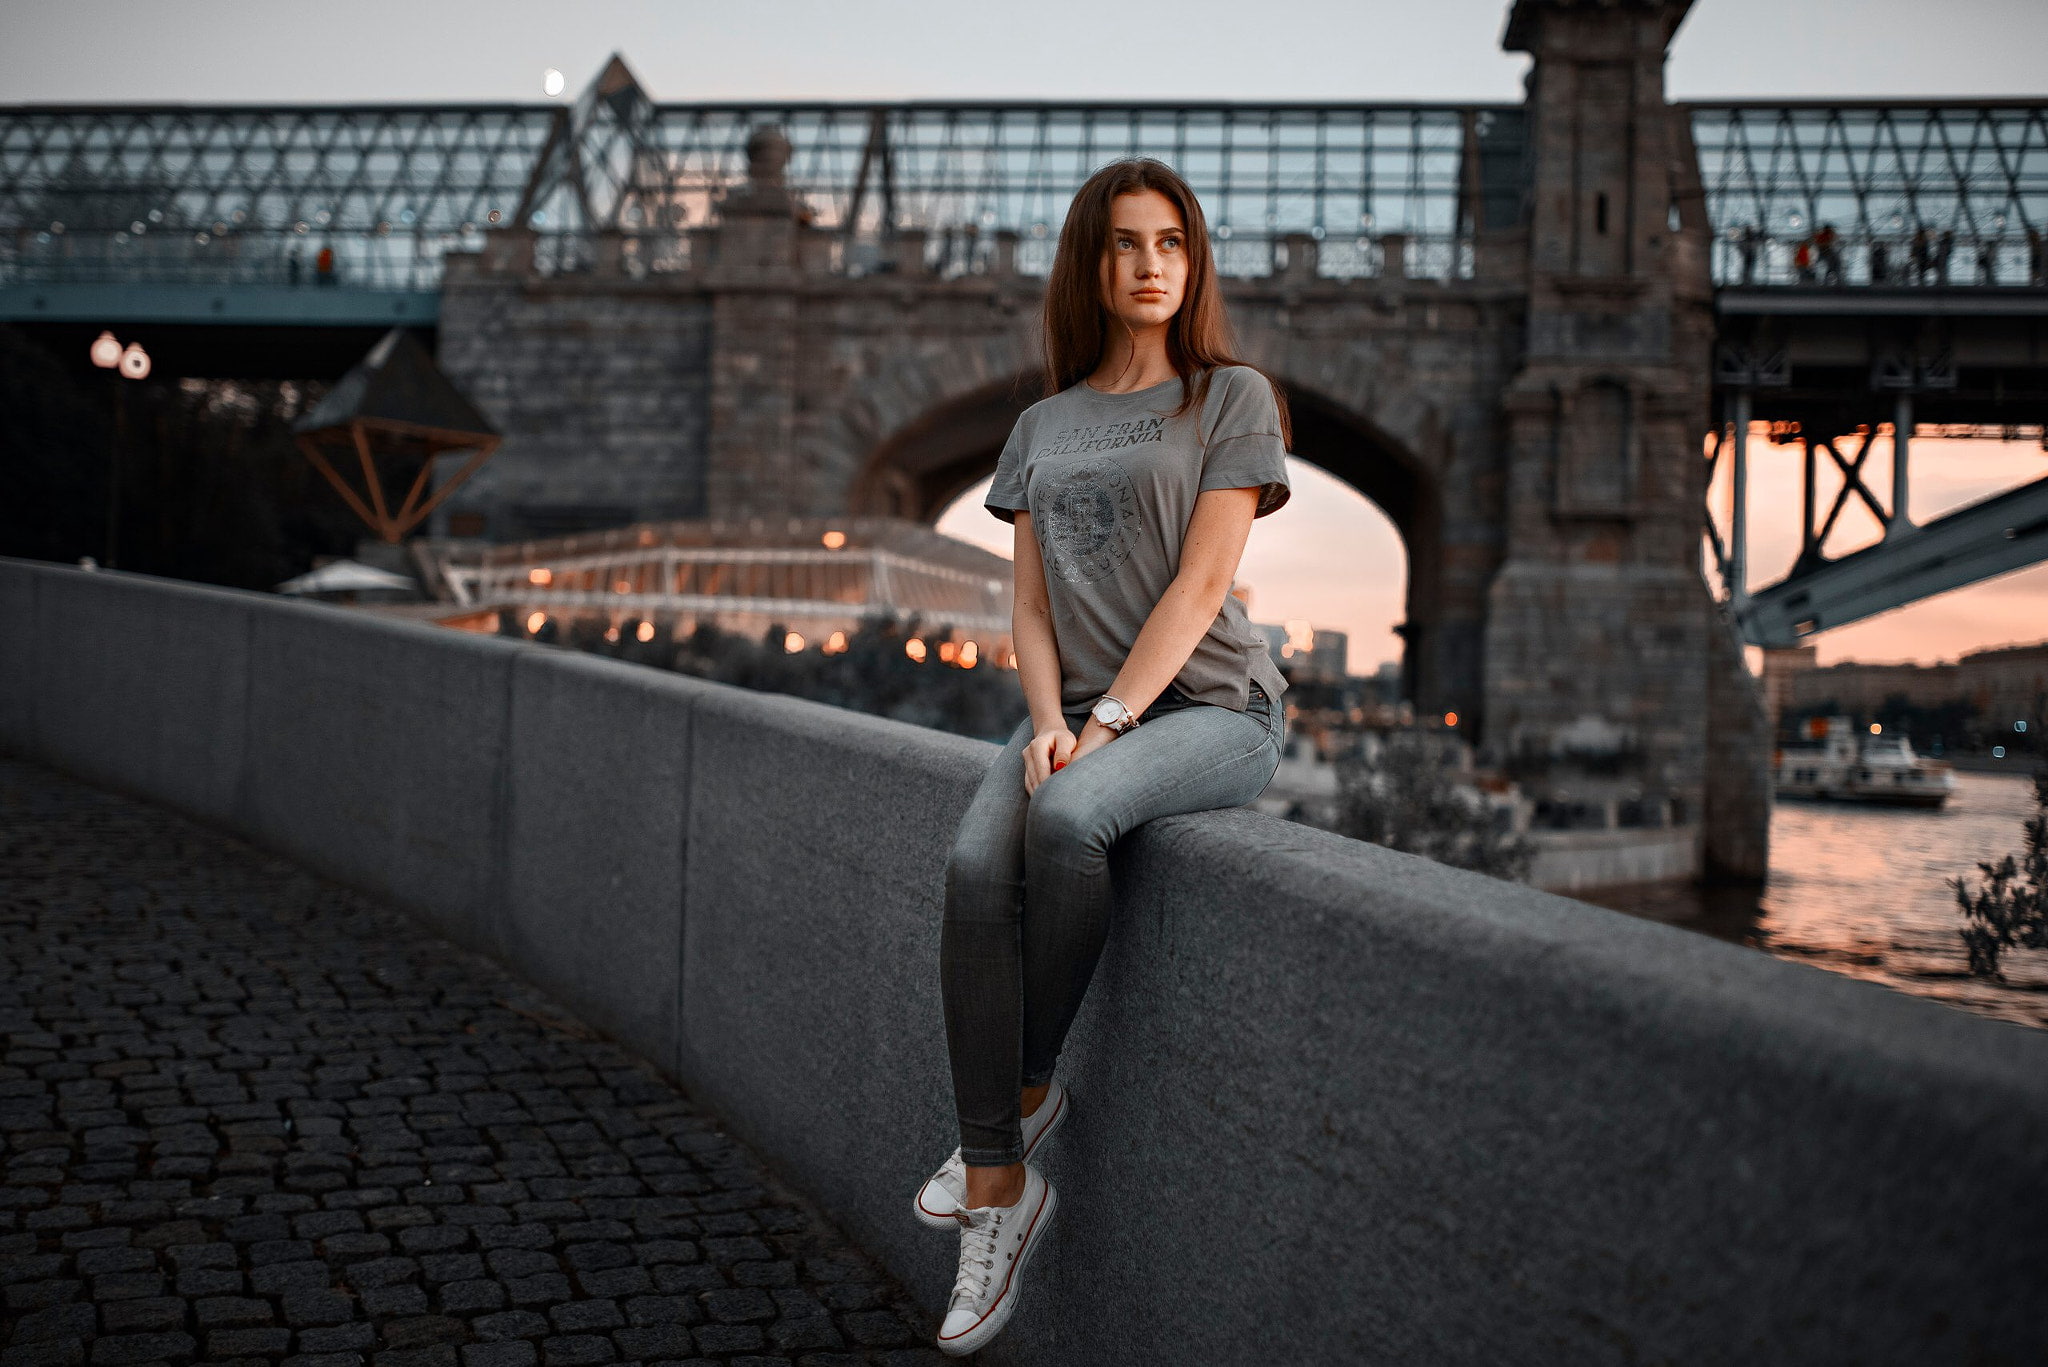 portrait, T-shirt, looking away, red nails, sitting, women outdoors